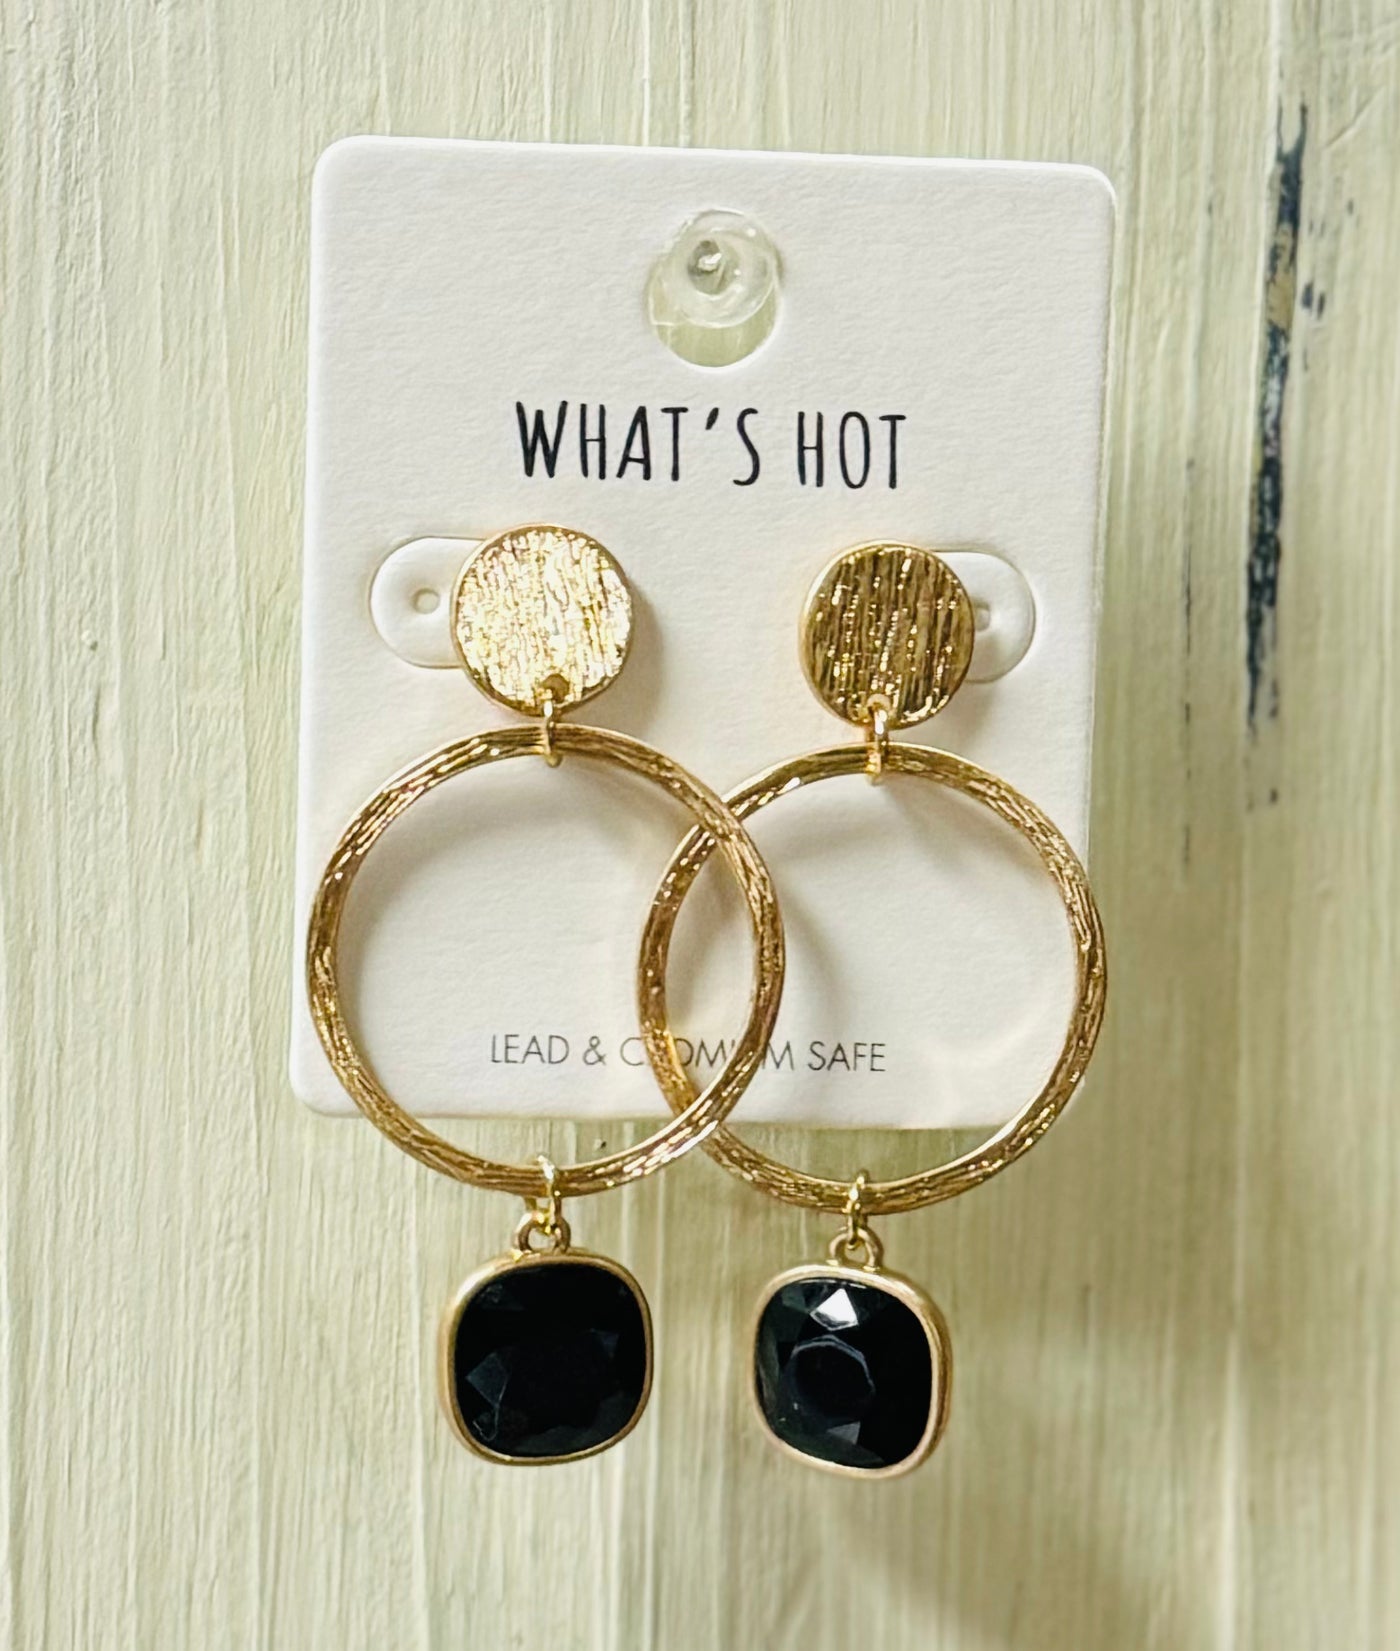 Worn Gold Open Circle w/Black Stone Accent Earring